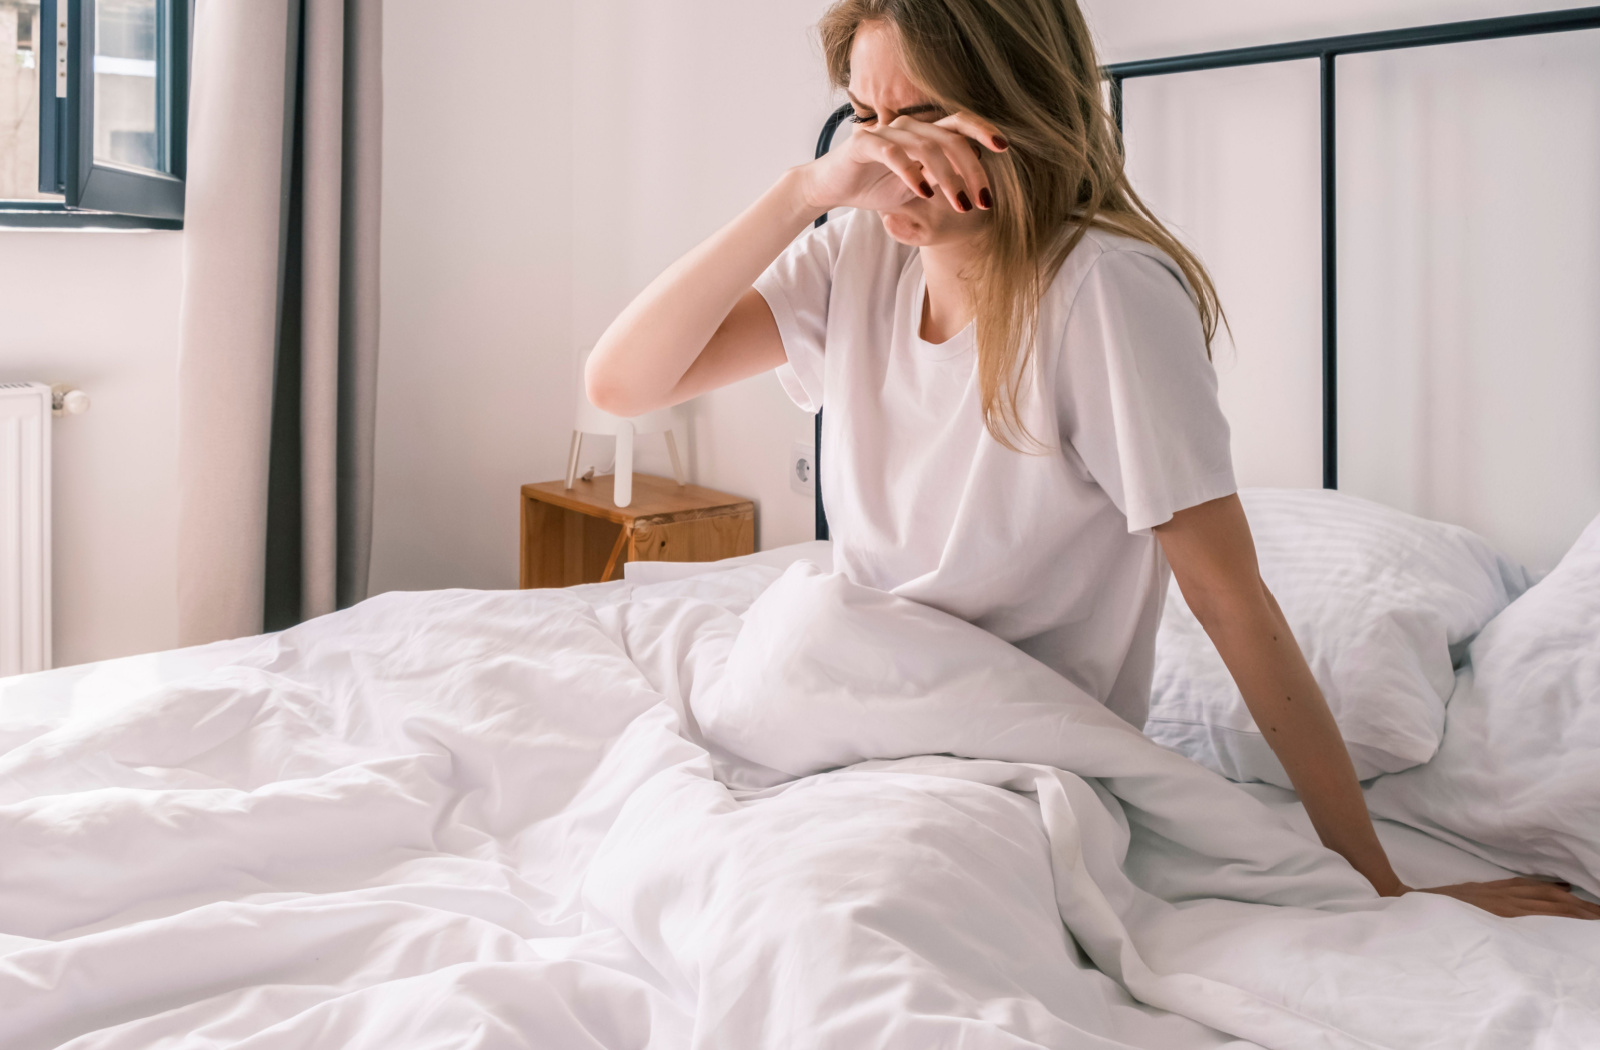 A woman in bed wearing a white shirt rubbing her eyes after waking up.